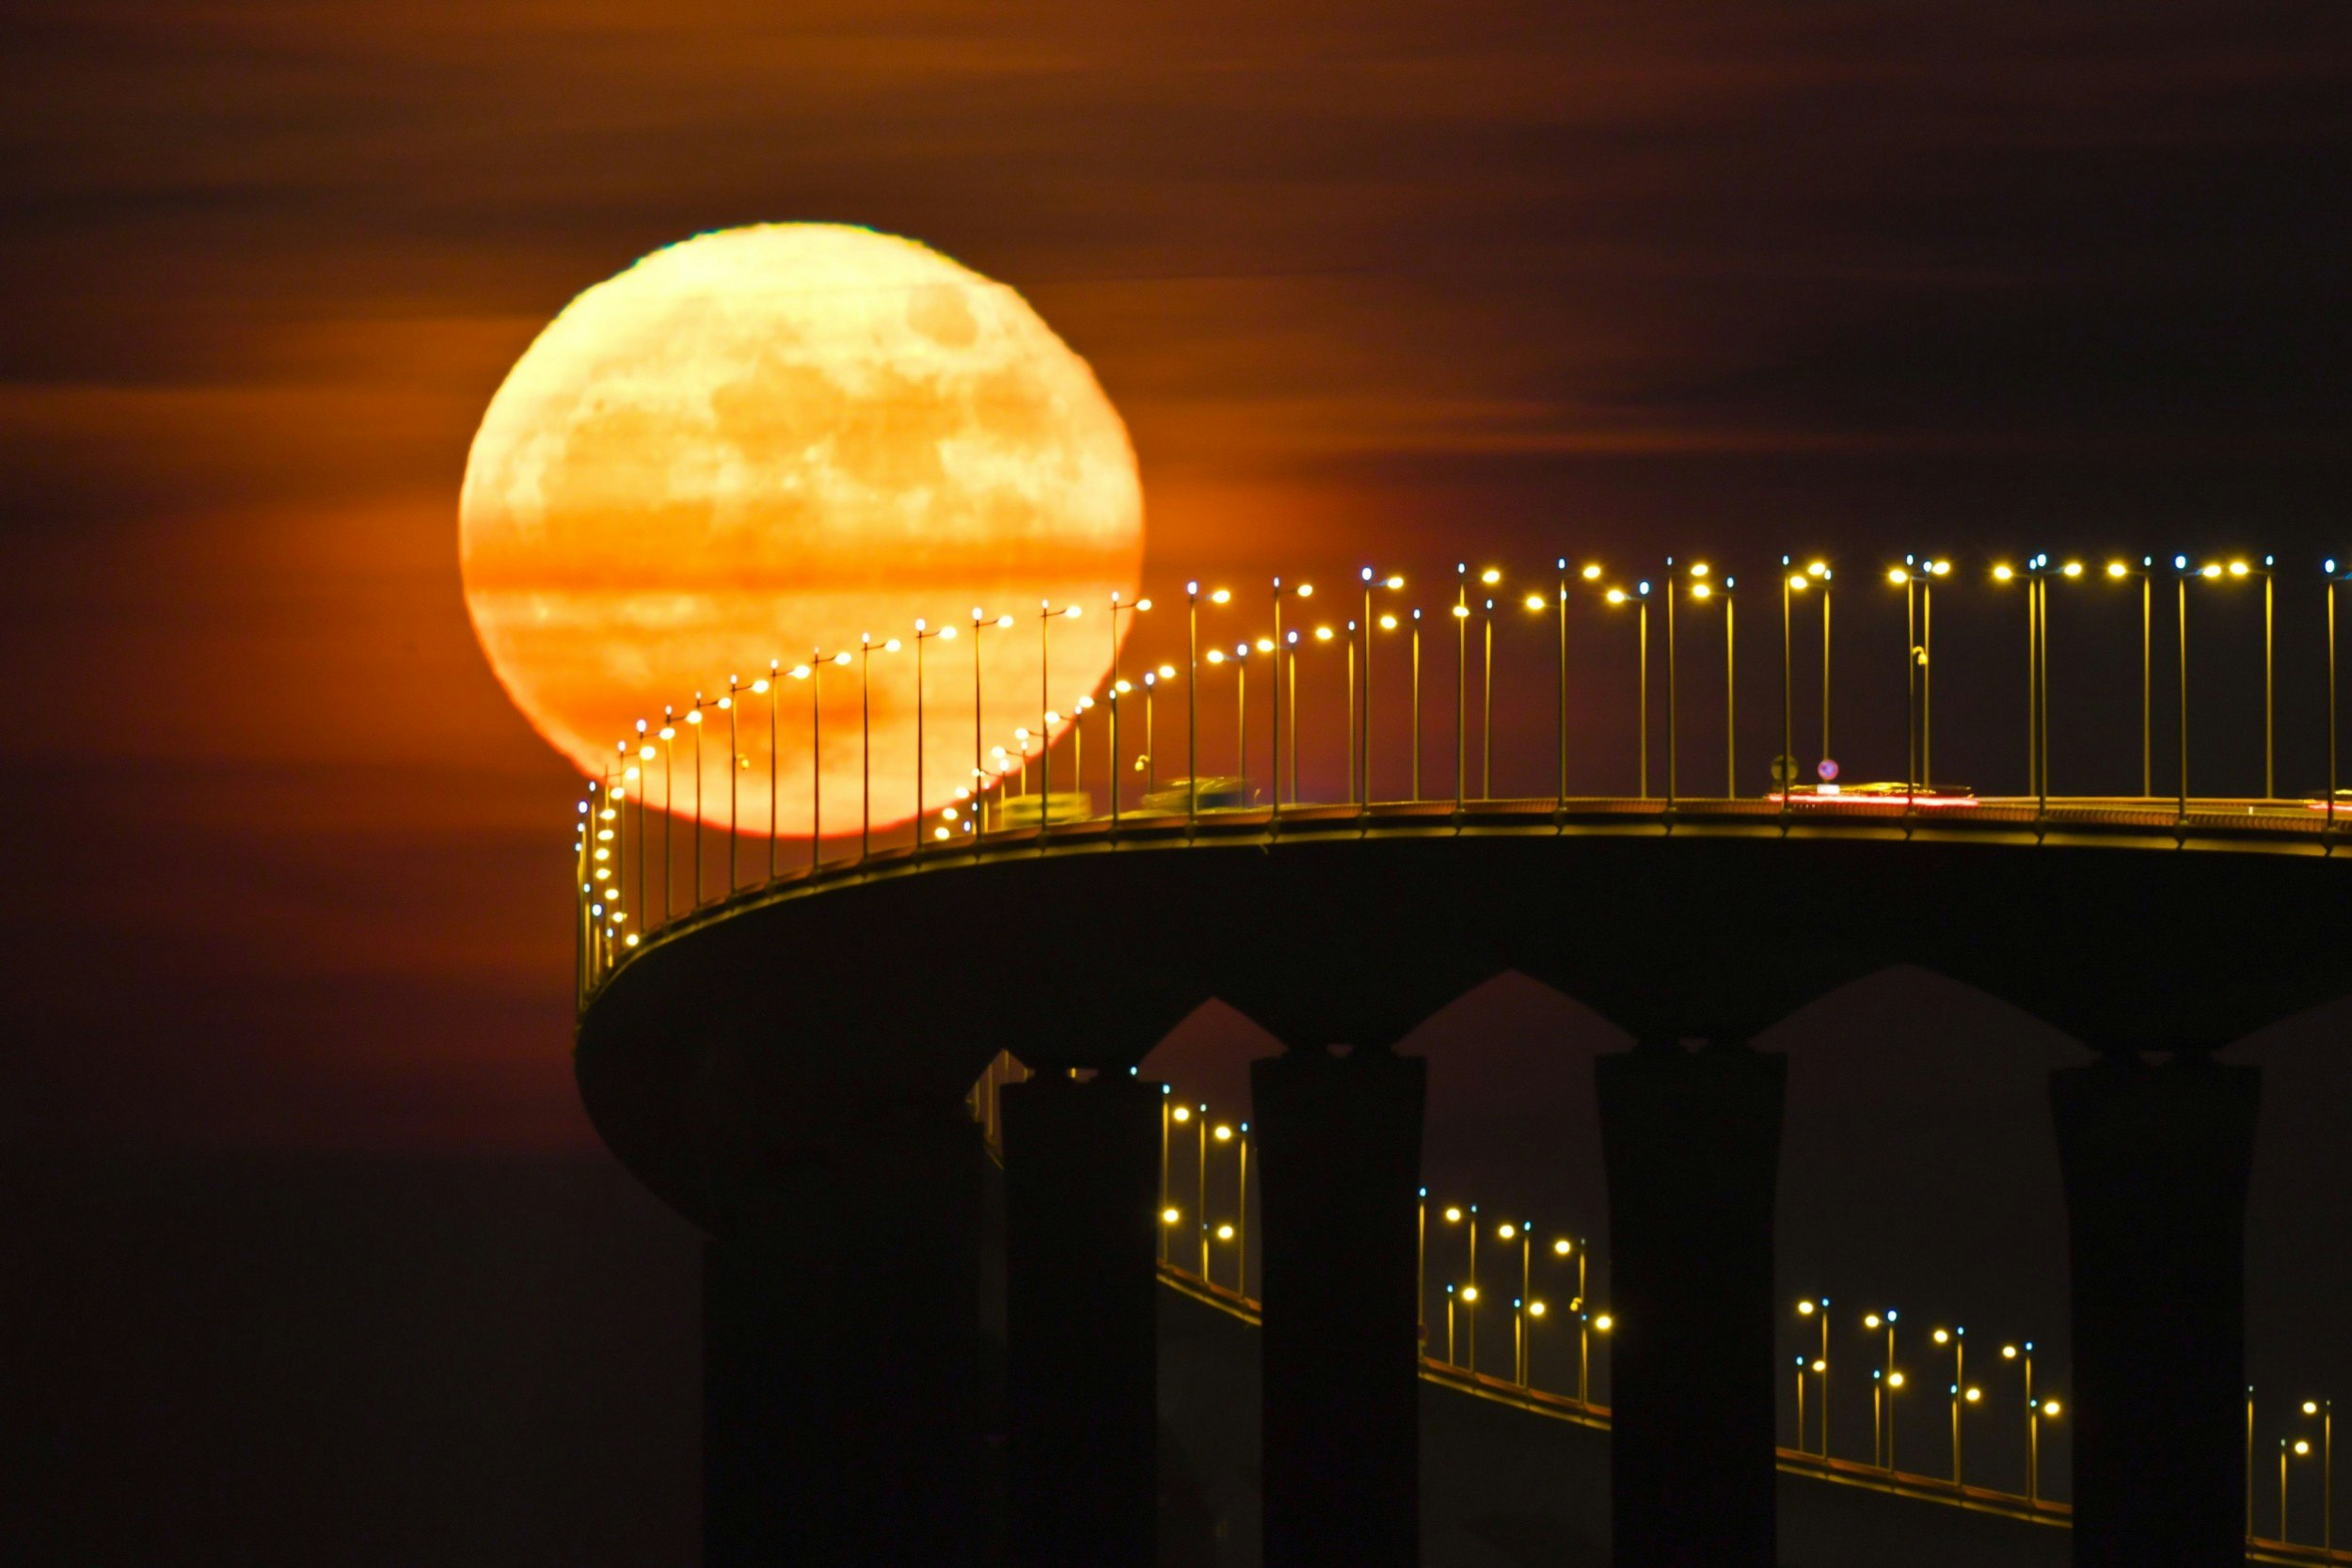 A full moon rising over the Re Island Bridge in Rivedoux